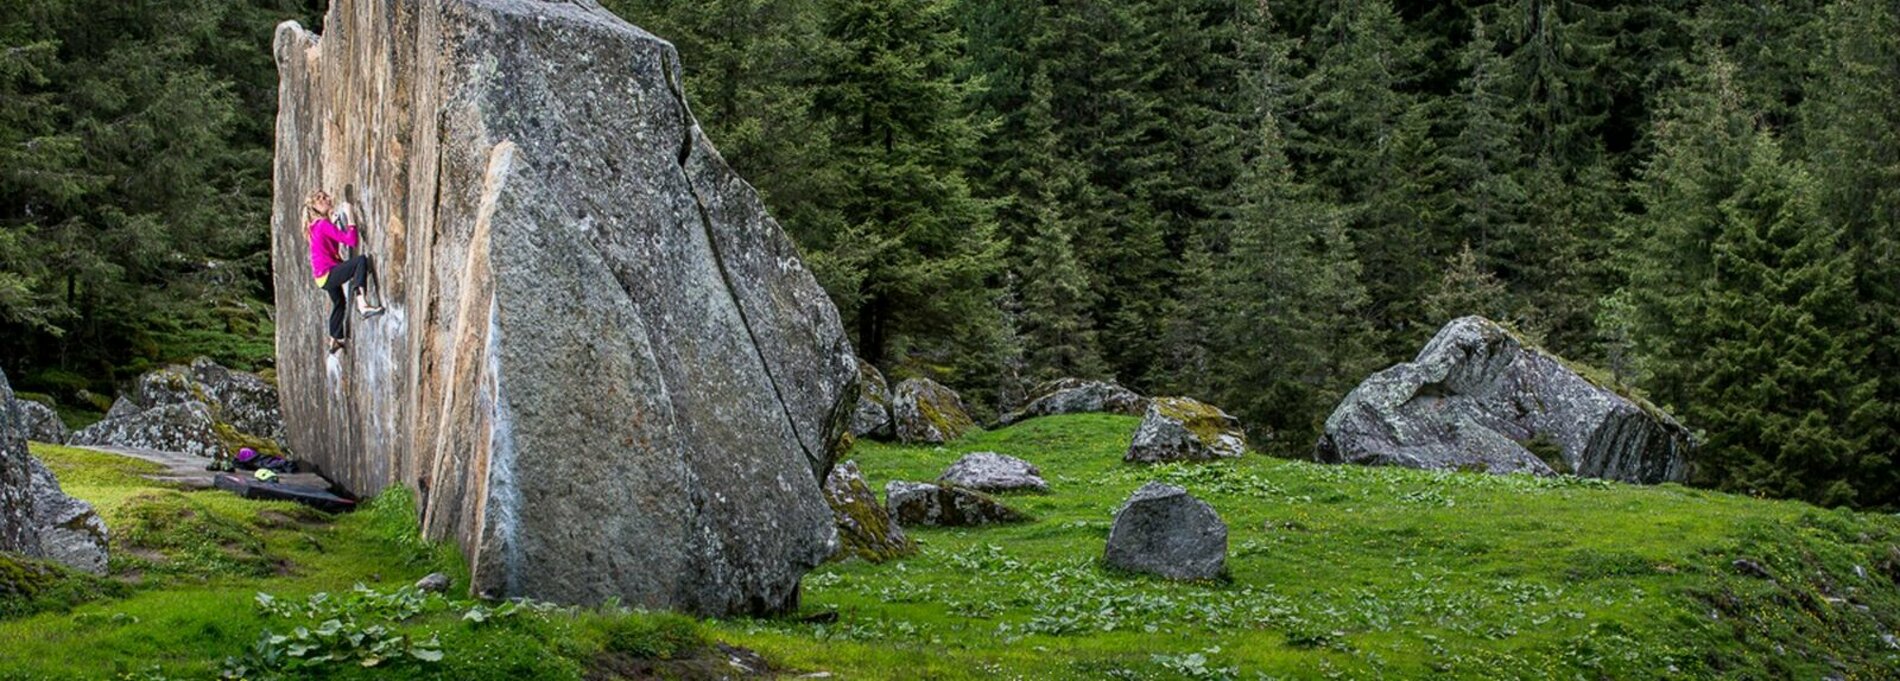 Large boulder on a meadow on which a young woman climbs. 